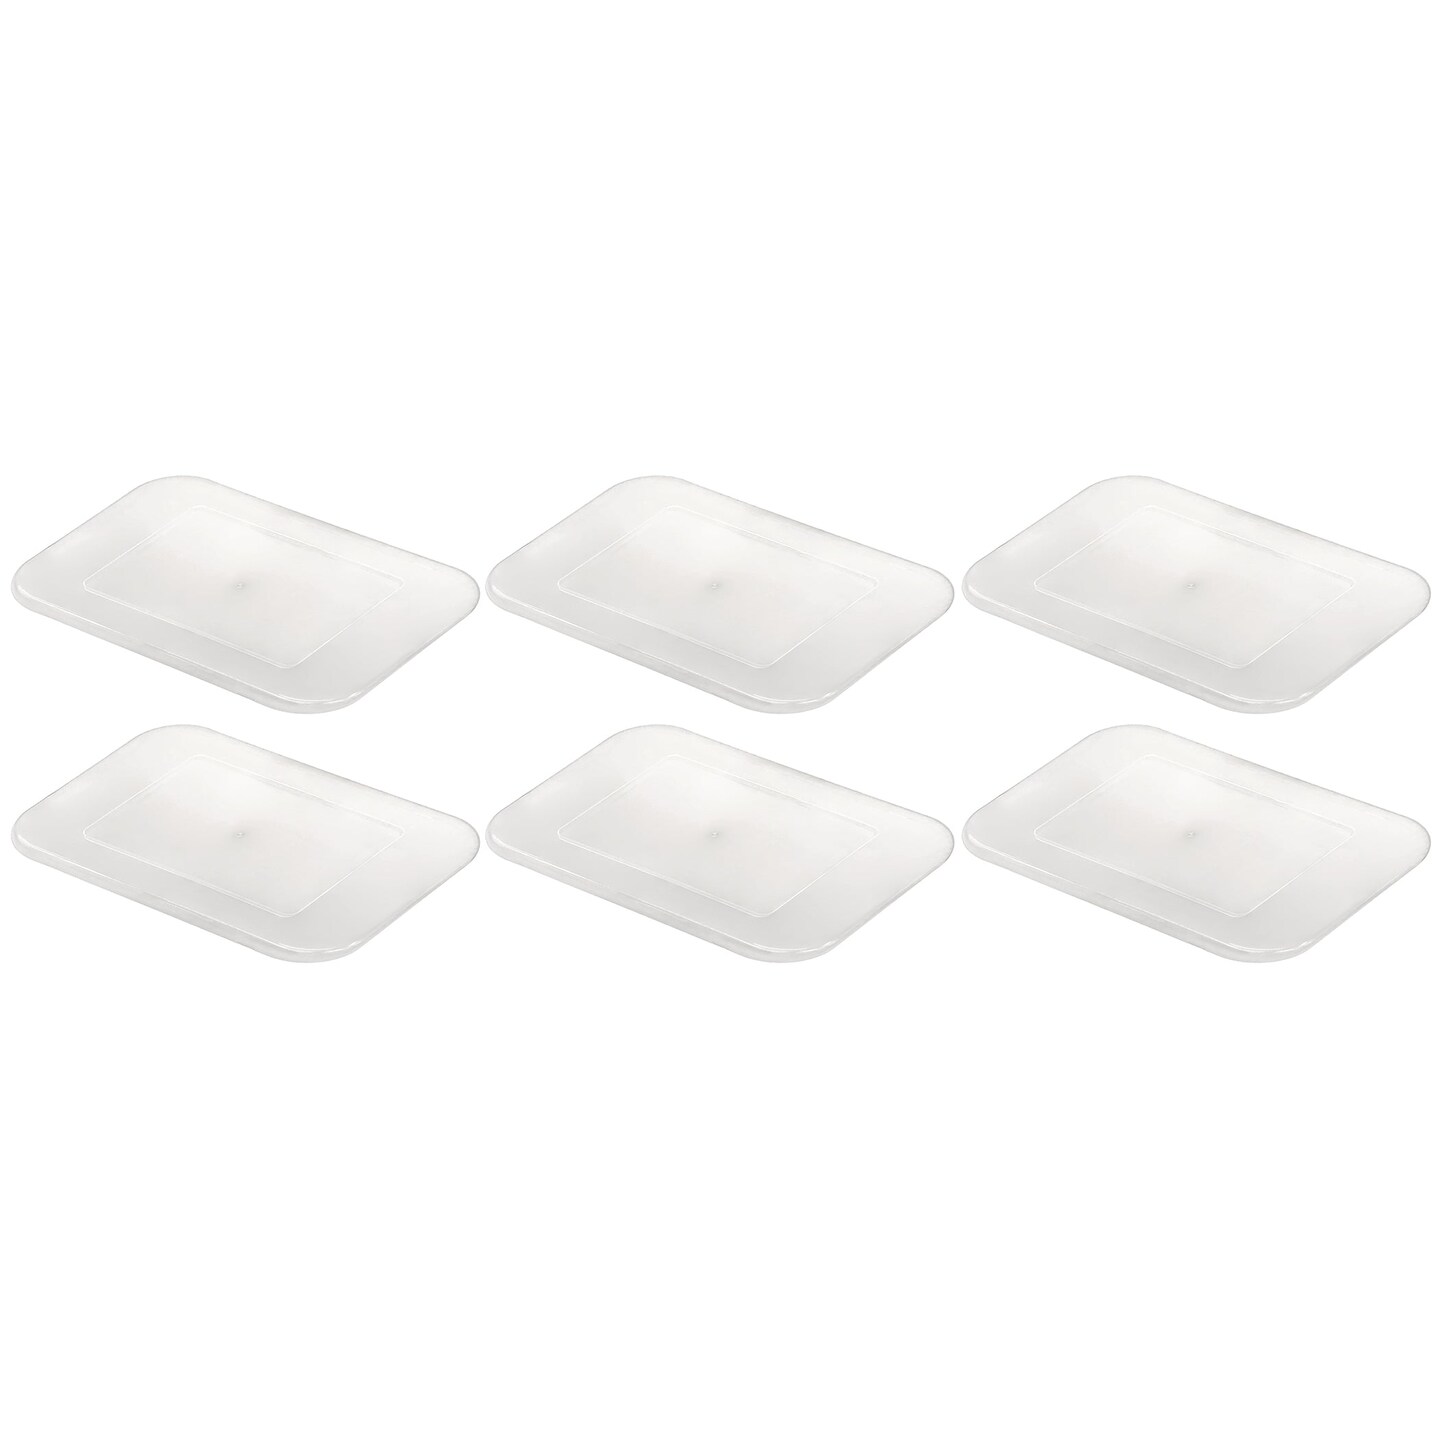 Plastic Letter Tray Lid, Clear, Pack of 6